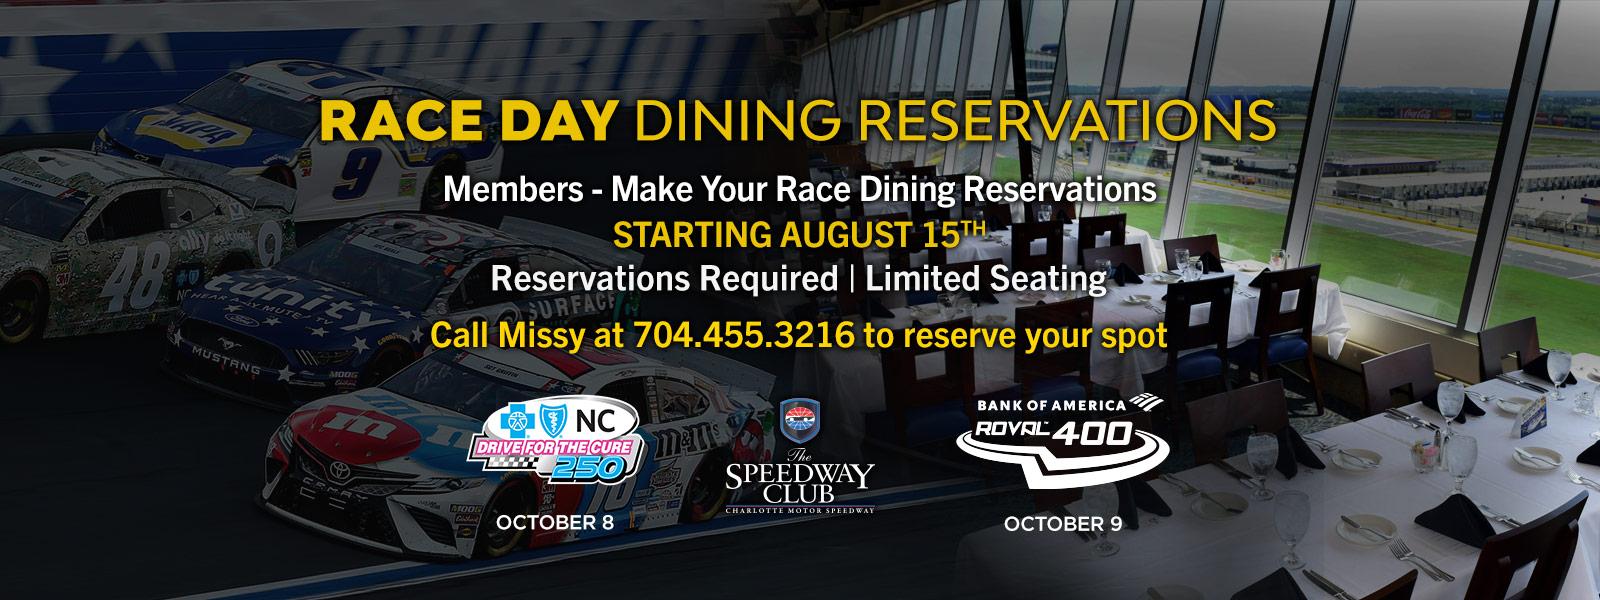 Race Day Dining Reservation - Bank of America 400 - Drive for the Cure 250